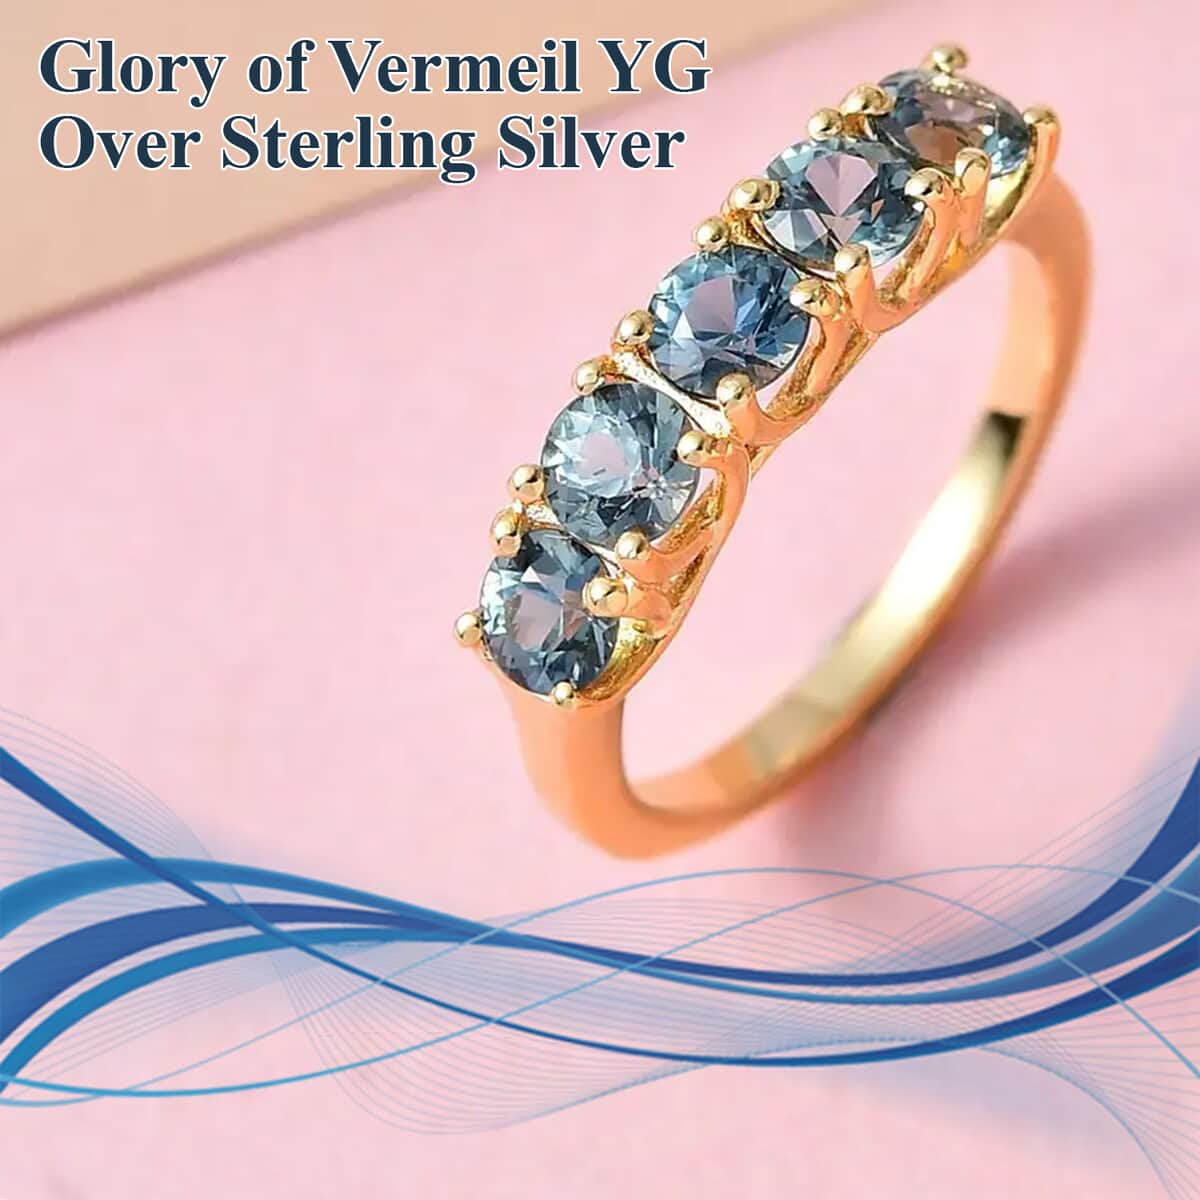 Parti Sapphire Ring ,Sapphire 5 Stone Ring , Half Eternity Band Ring ,Vermeil YG Over Sterling Silver Ring ,Wedding Band For Women 1.75 ctw (Size 6.0) image number 1